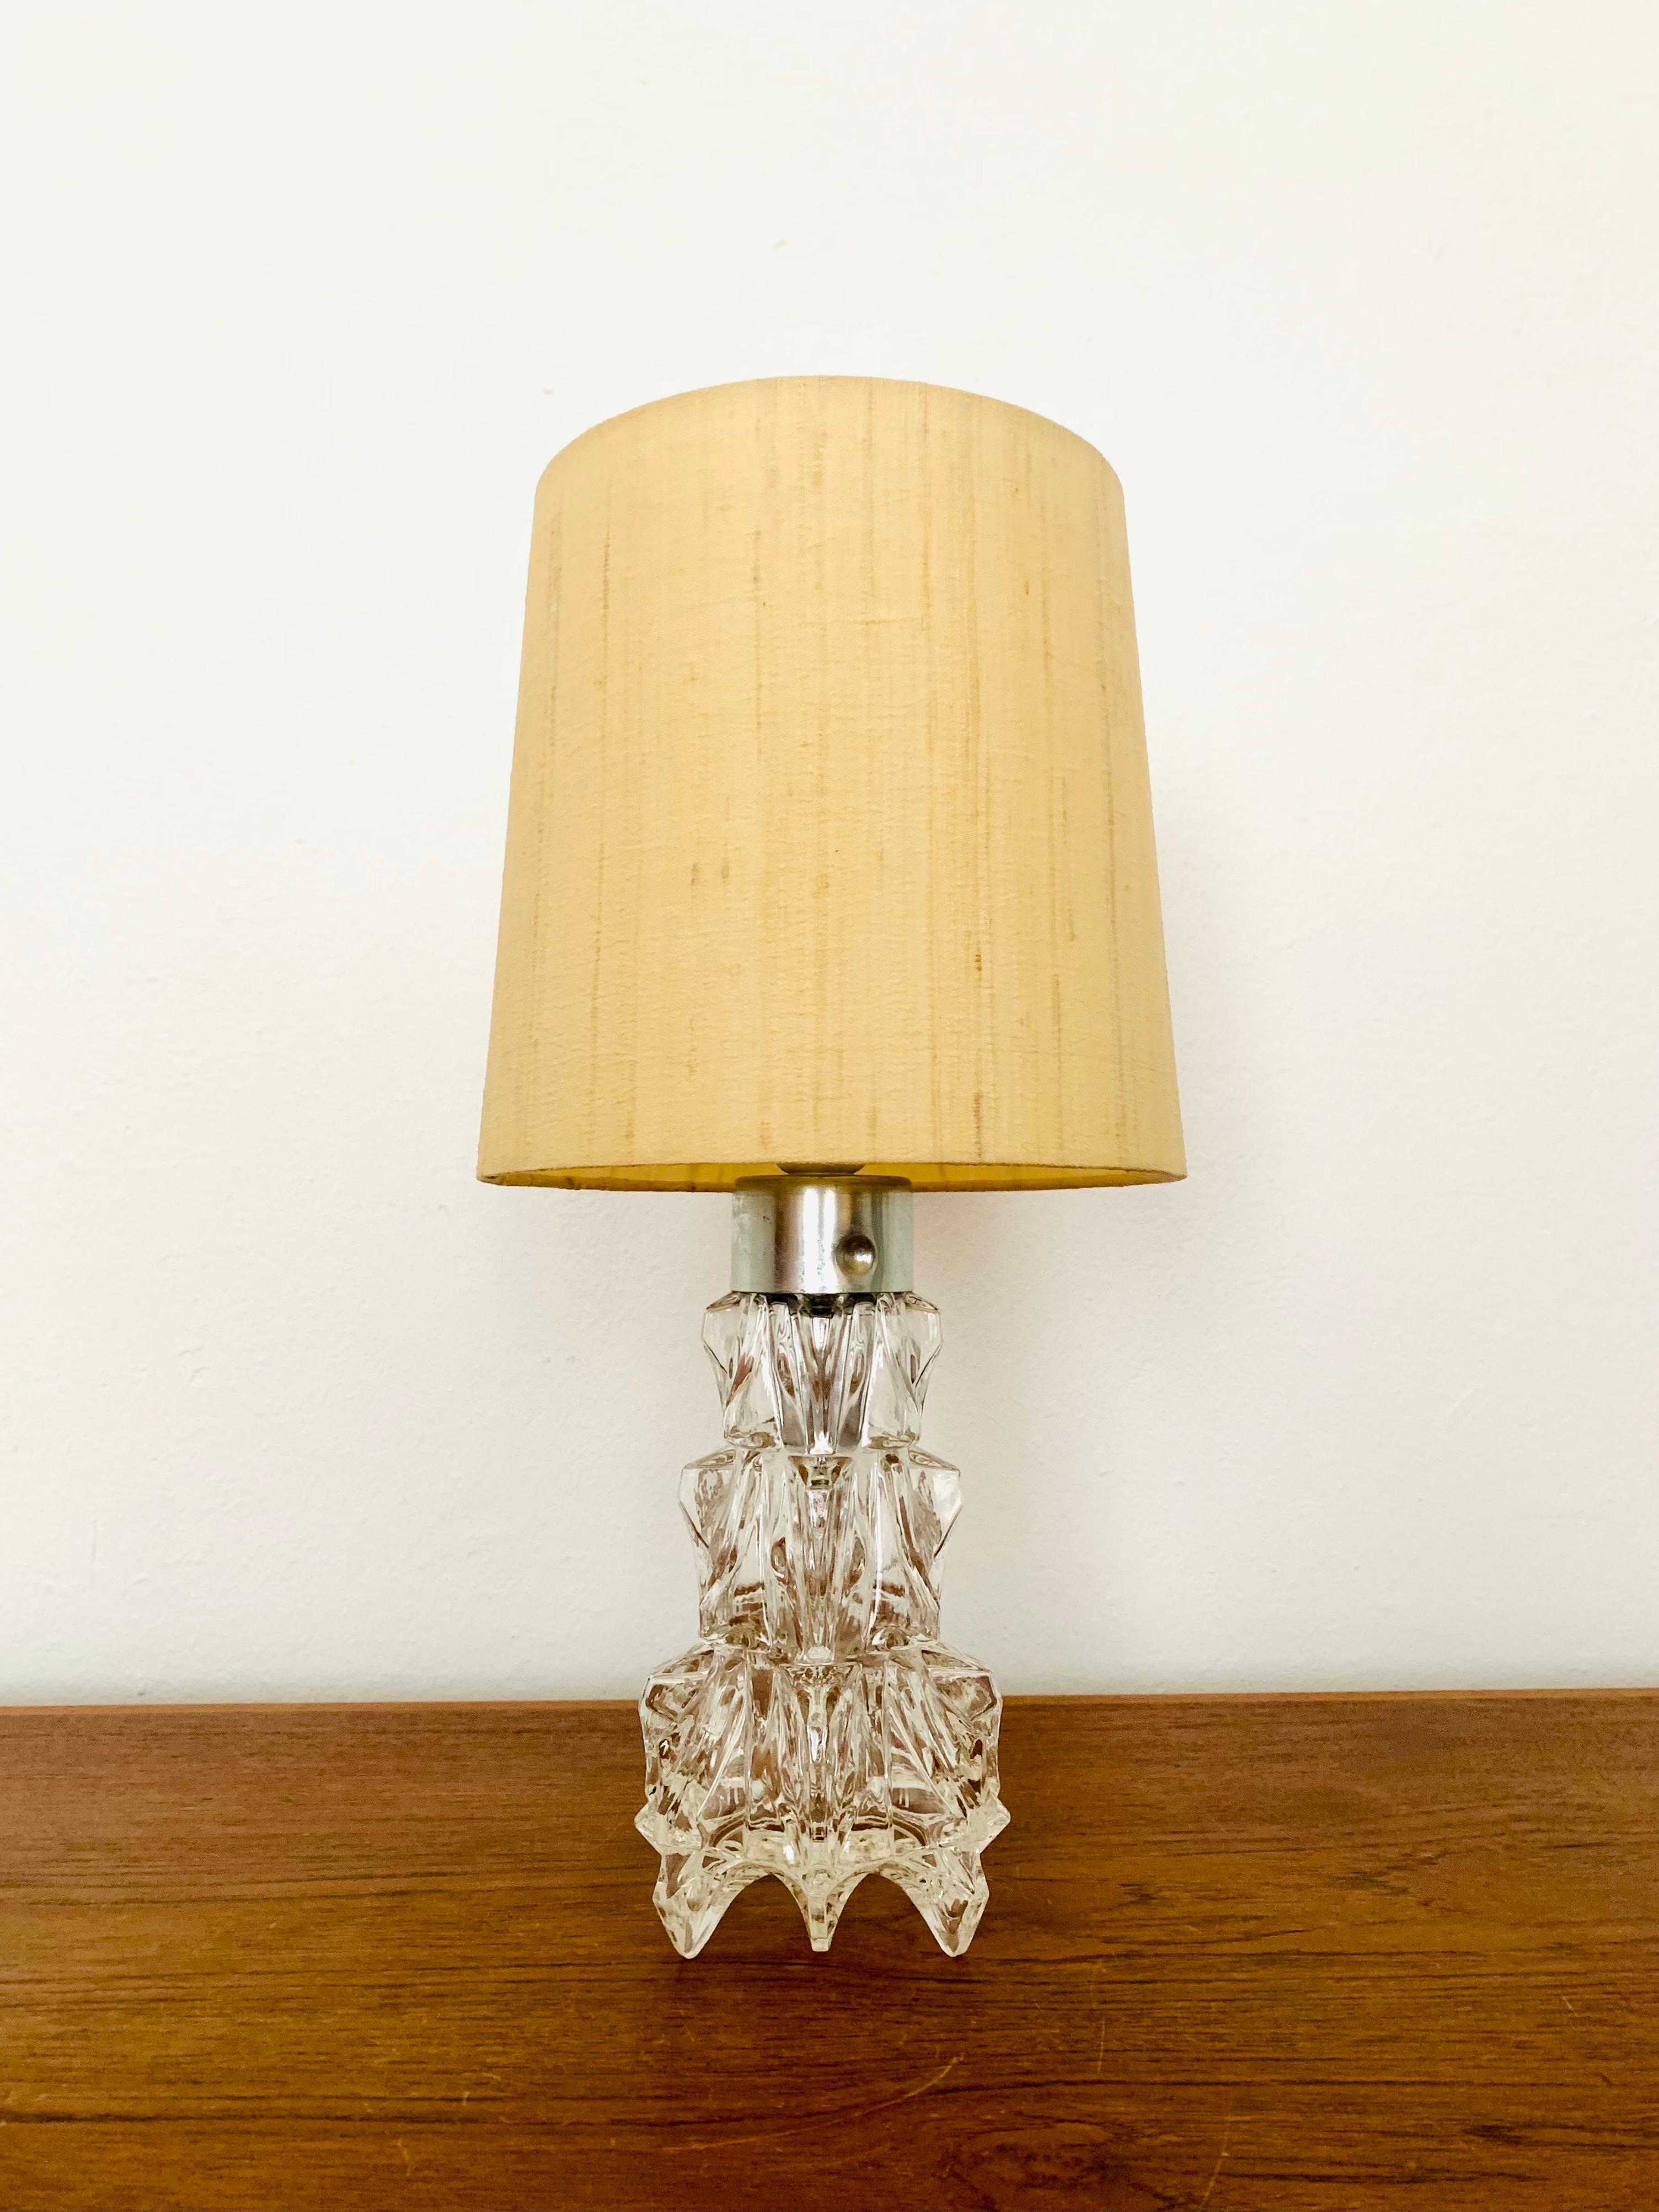 Stunning Murano glass table lamp from the 1960s.
The illuminated glass base creates an impressive sparkling light display.
Very high quality workmanship and fantastic design.

Condition:

Very good vintage condition with slight signs of age-related